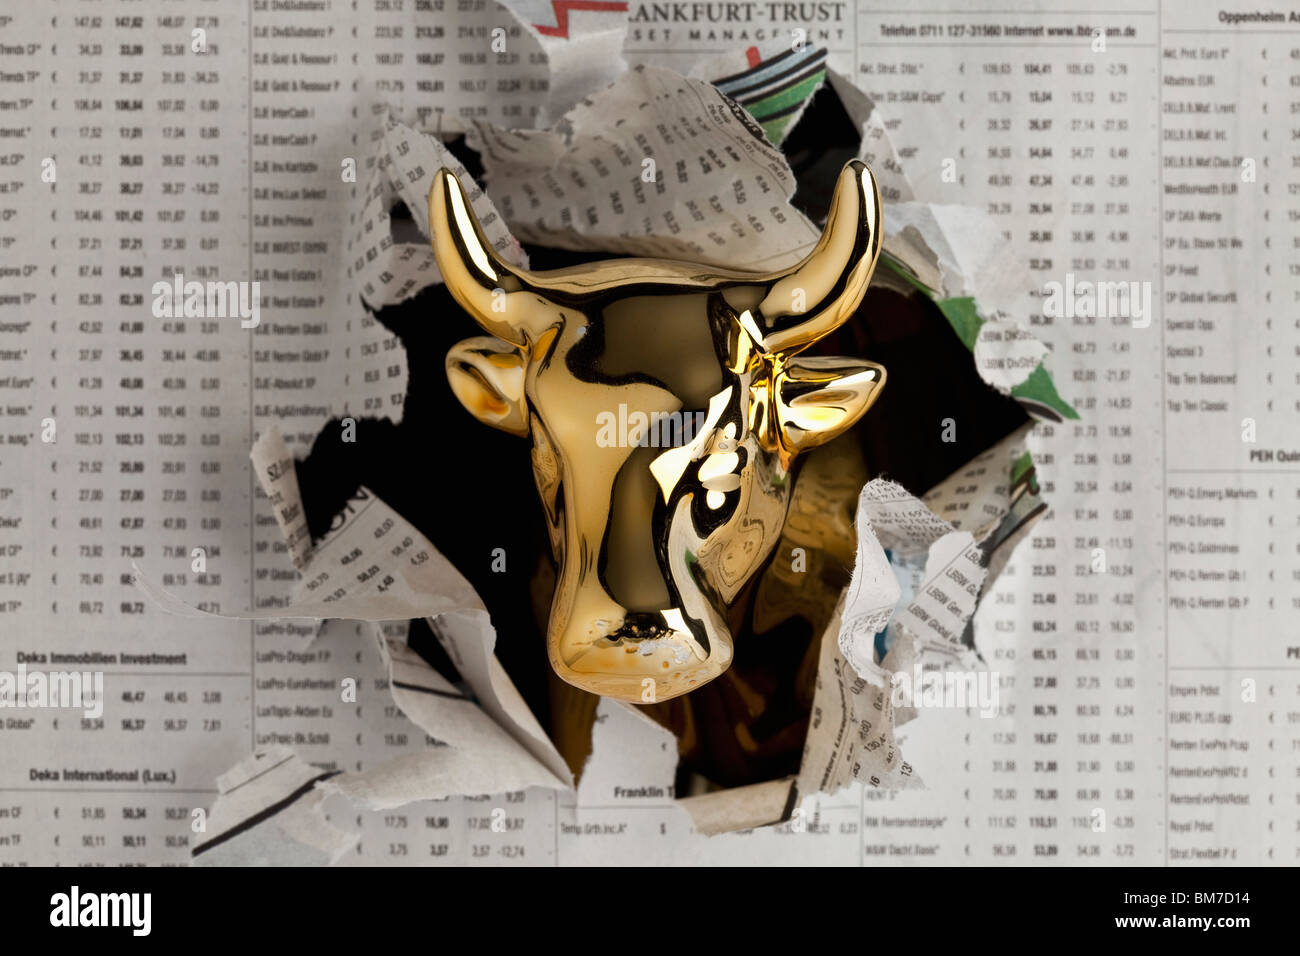 Detail of a golden bull breaking through the finance section of a newspaper Stock Photo